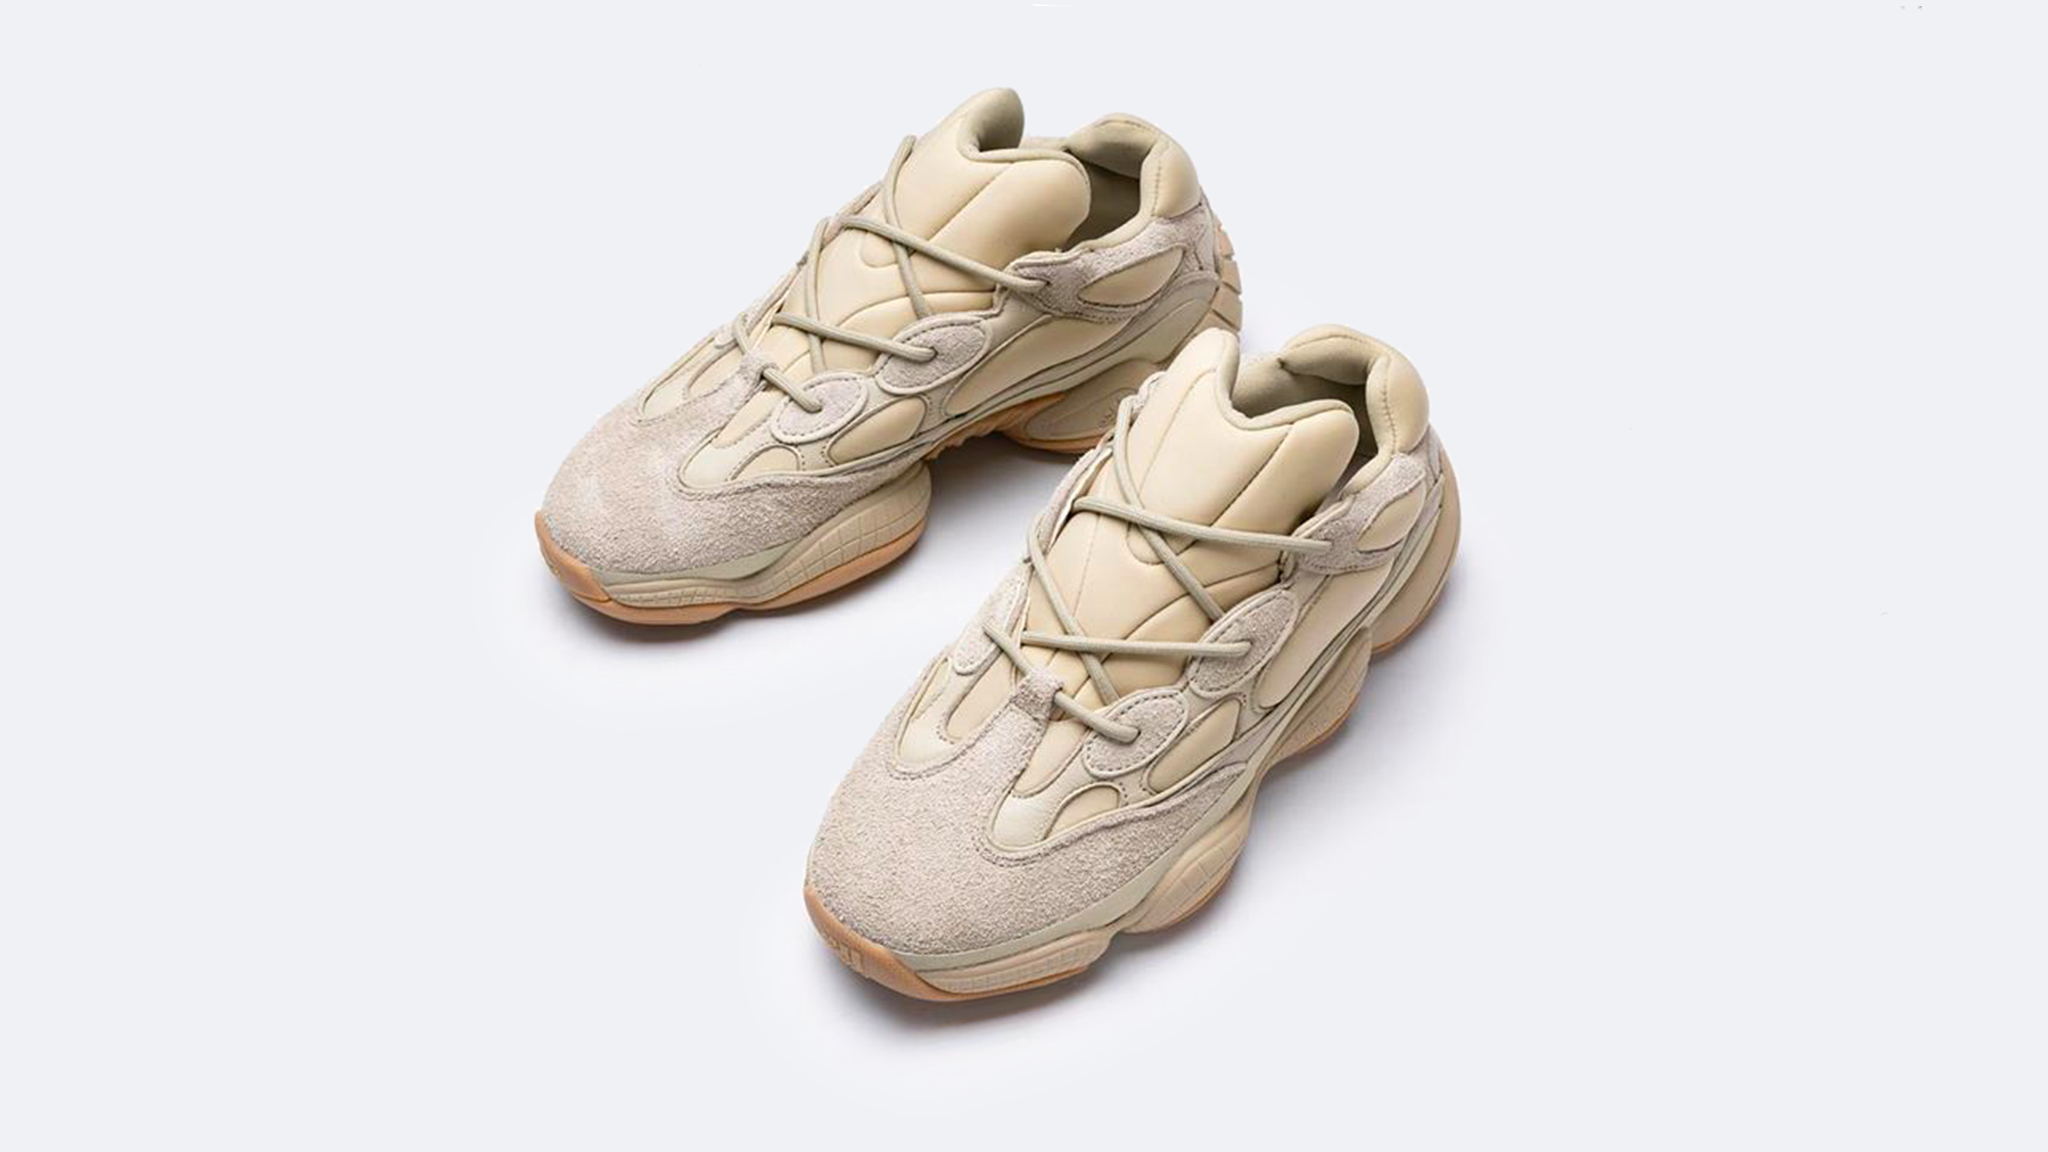 YEEZY 500 Stone First Look